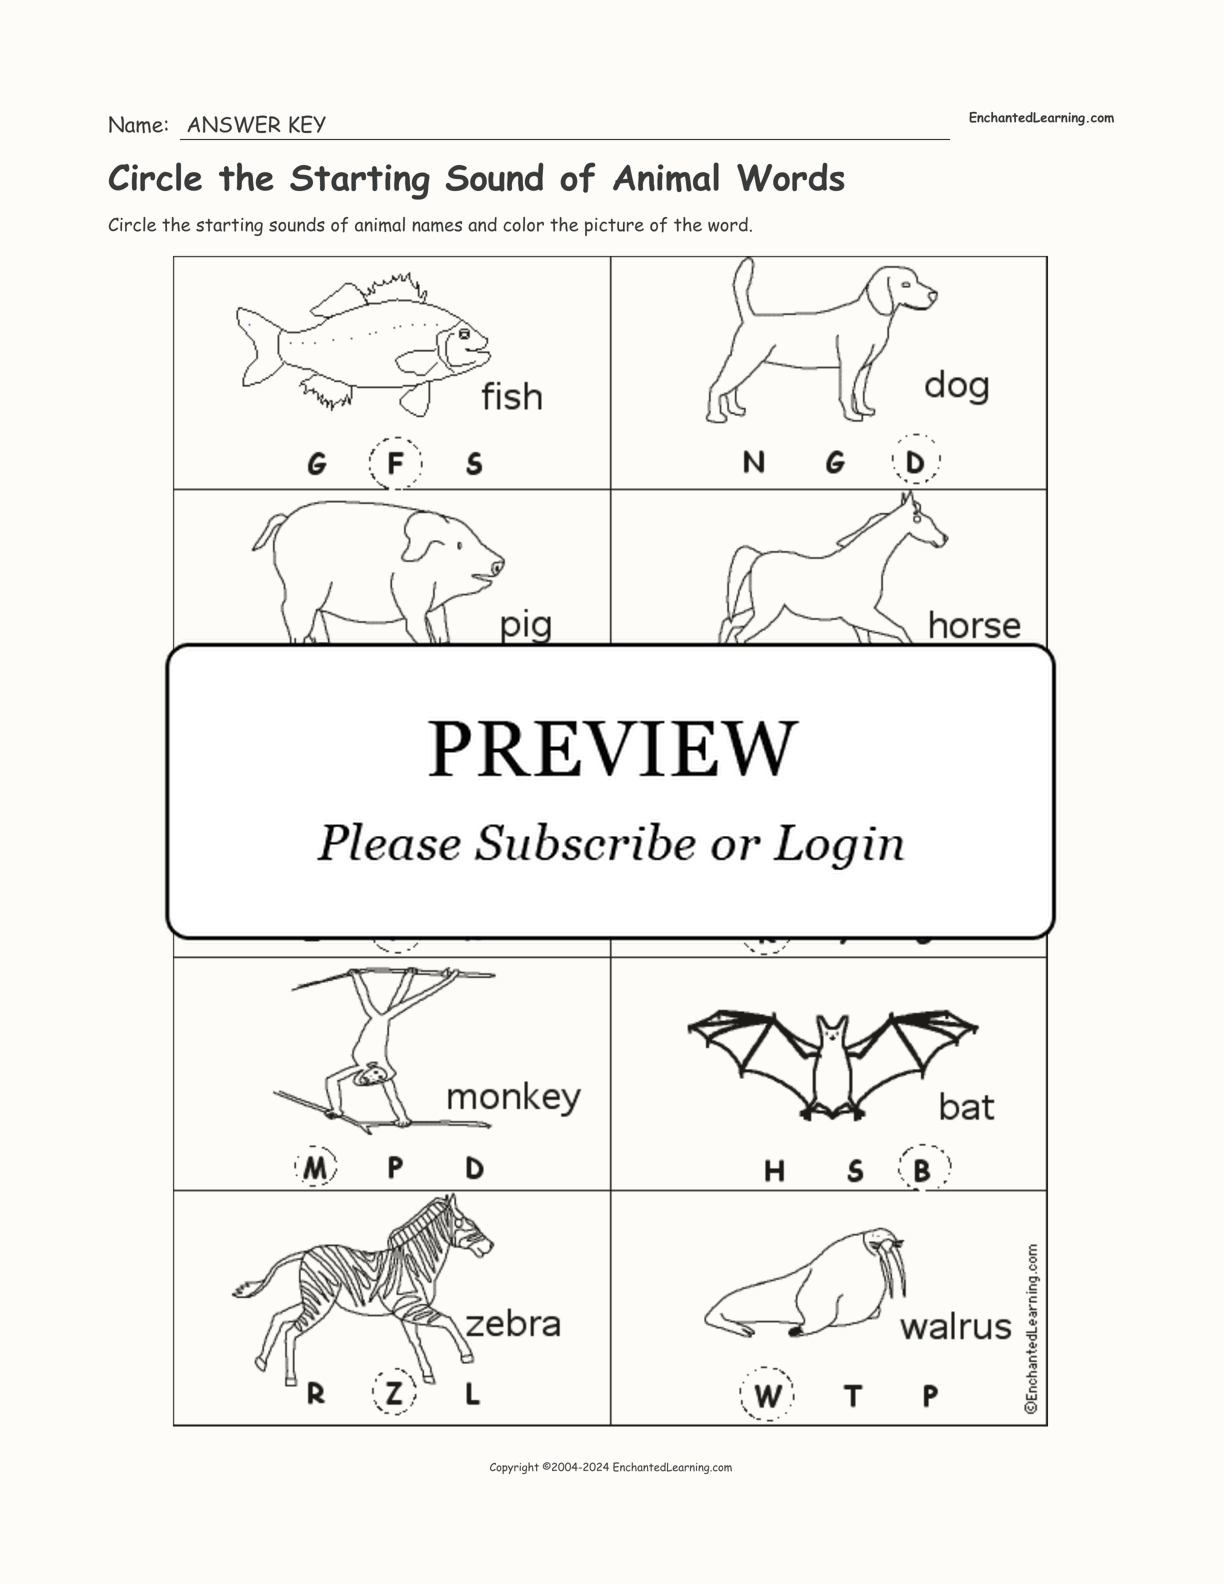 Circle the Starting Sound of Animal Words interactive worksheet page 2